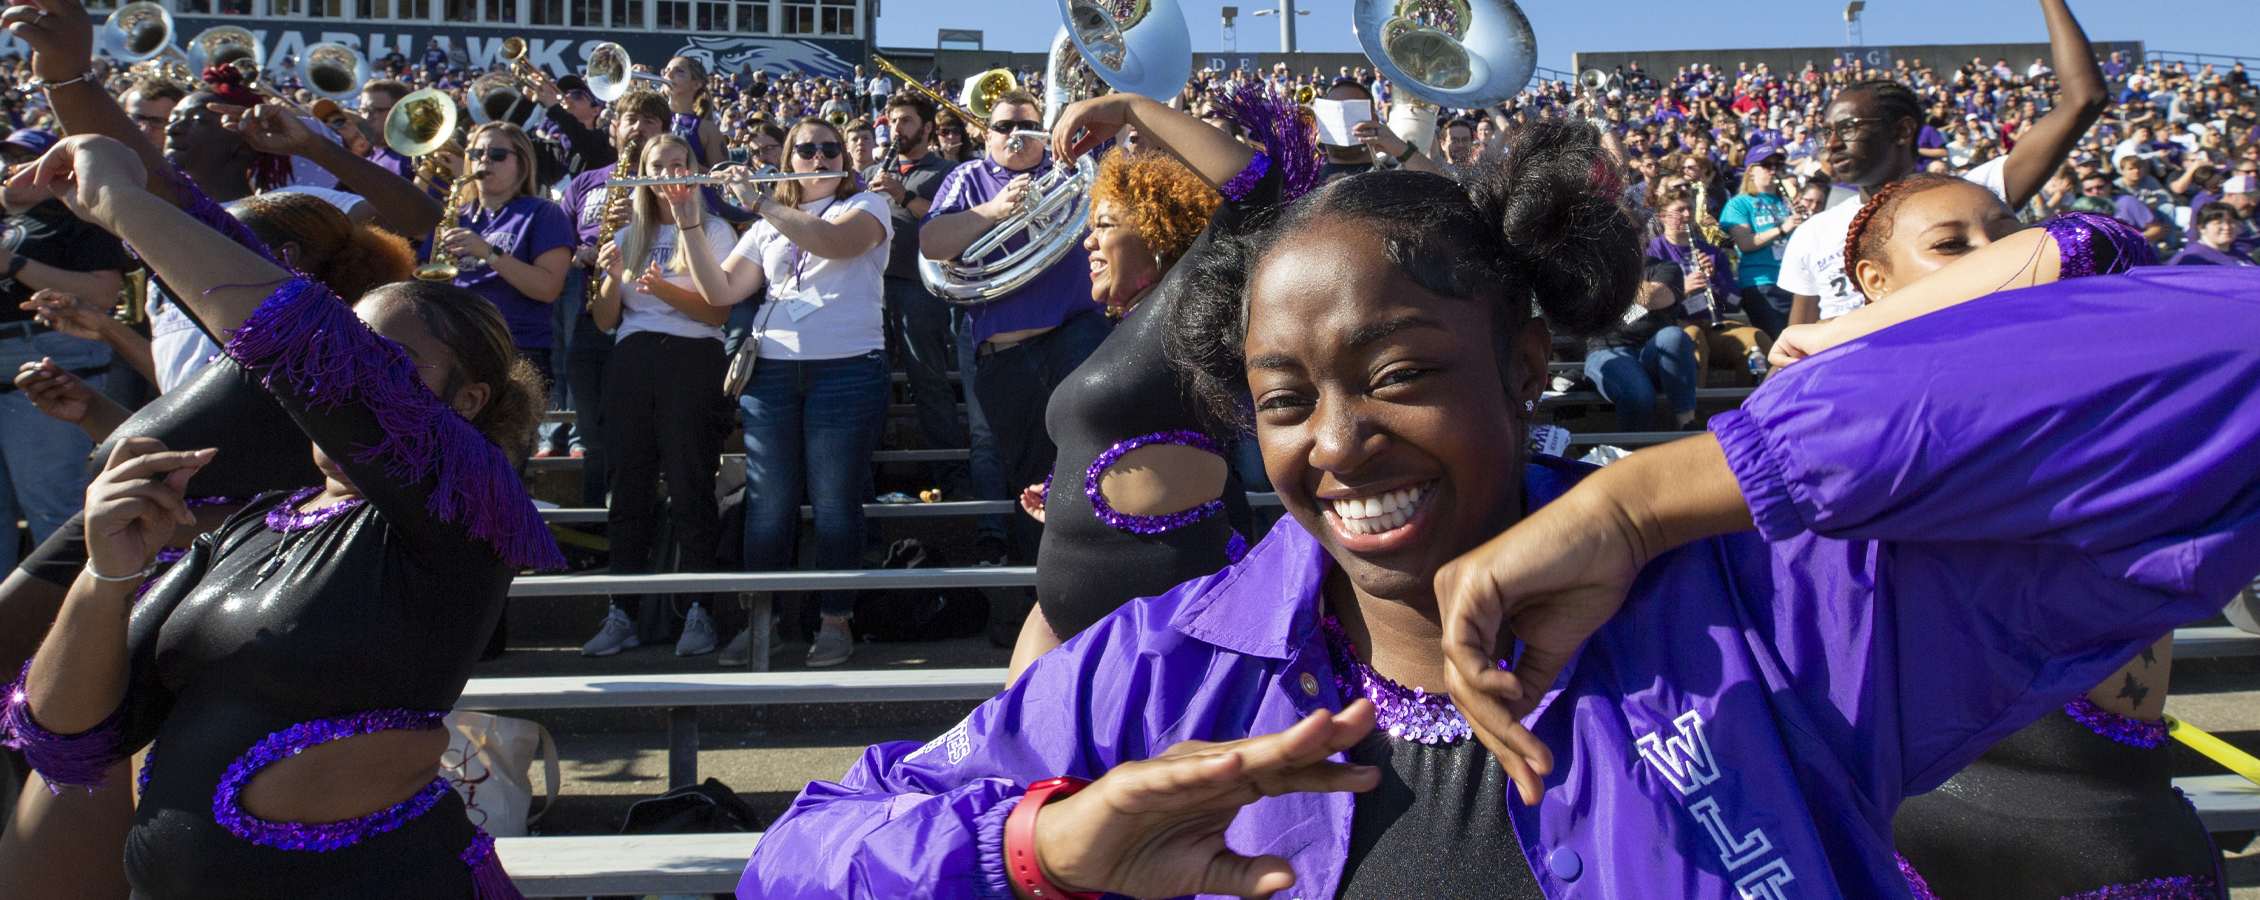 A student smiles and dances in front of the crowd at Perkins Stadium.